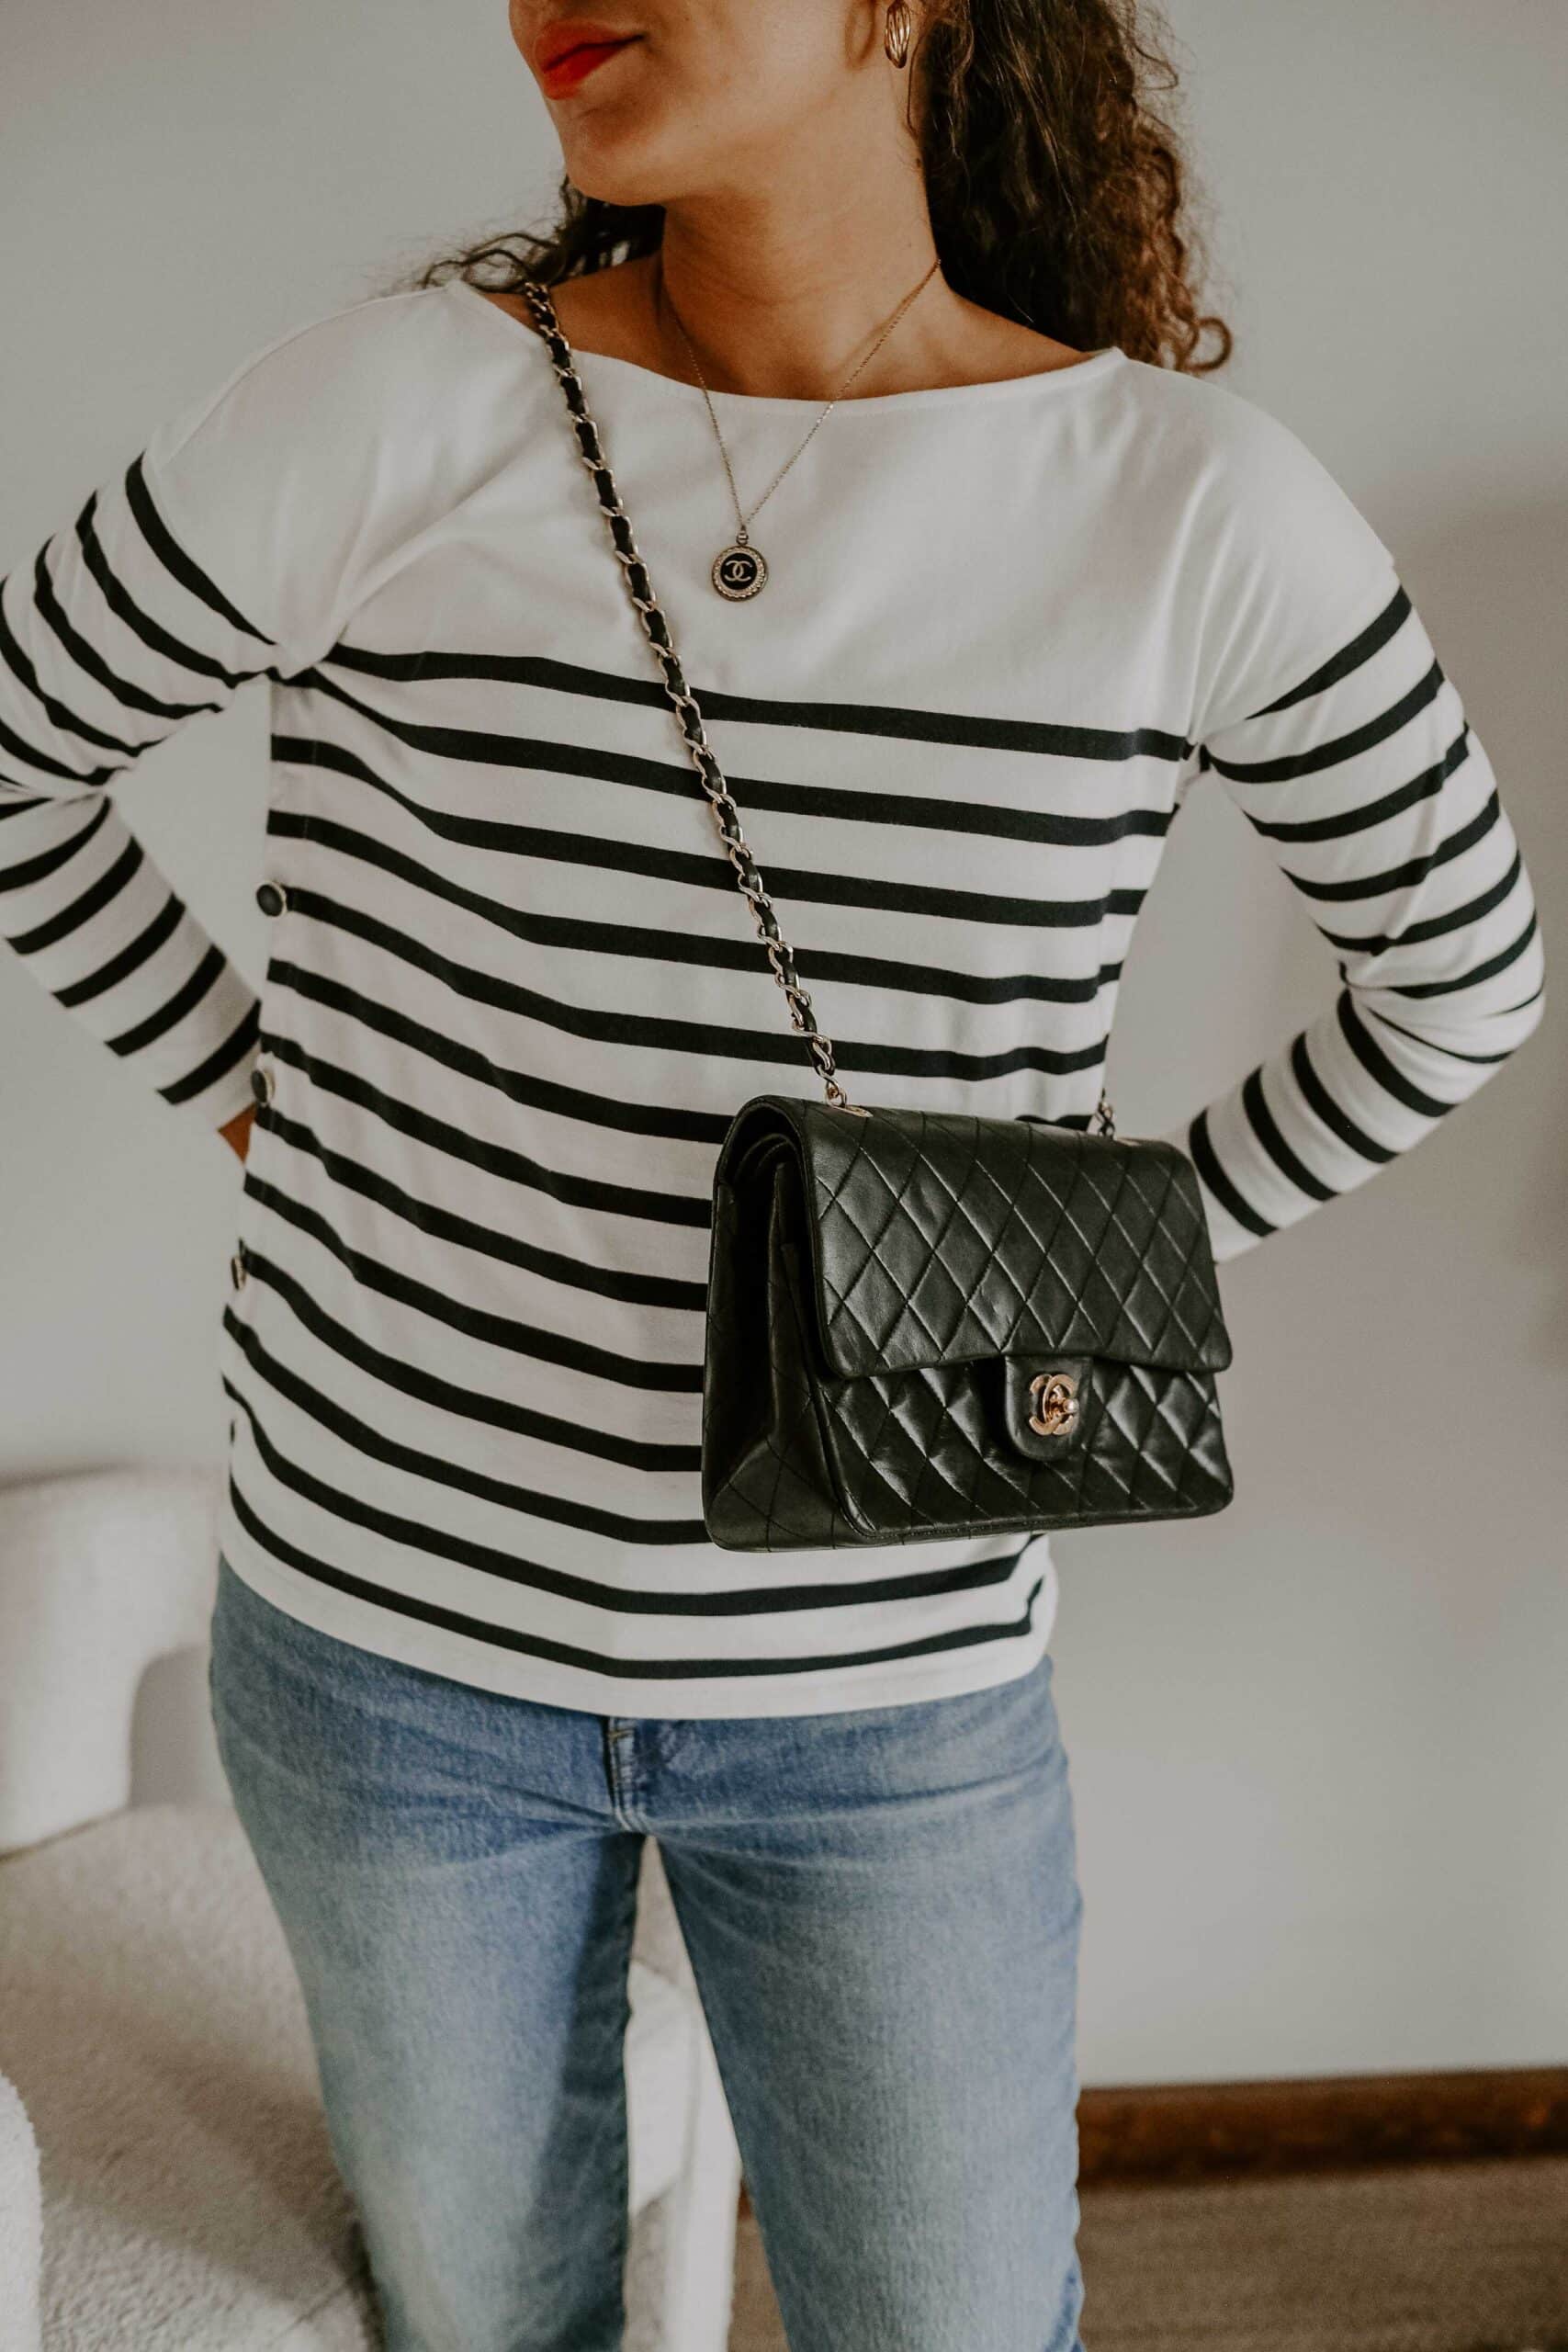 striped shirt and jeans outfit sezane